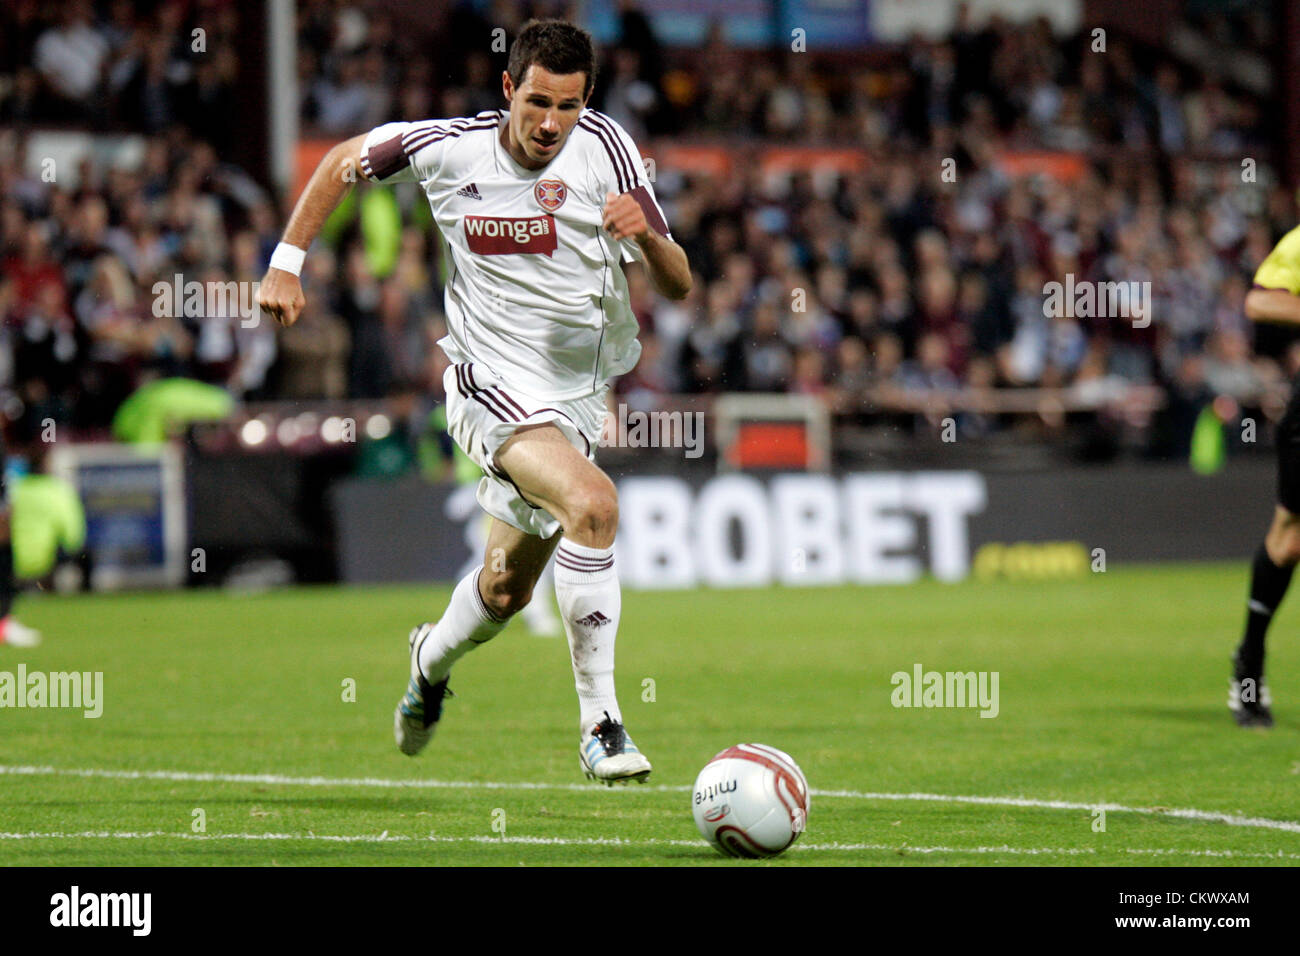 23.08.2012 Edinburgh, Scotland. 4 Ryan McGowan in action during the Europa League Qualifying 1st leg tie between Hearts and Liverpool from the Tynecastle Stadium. Hearts lost 0-1 to an own goal in the first leg. Stock Photo